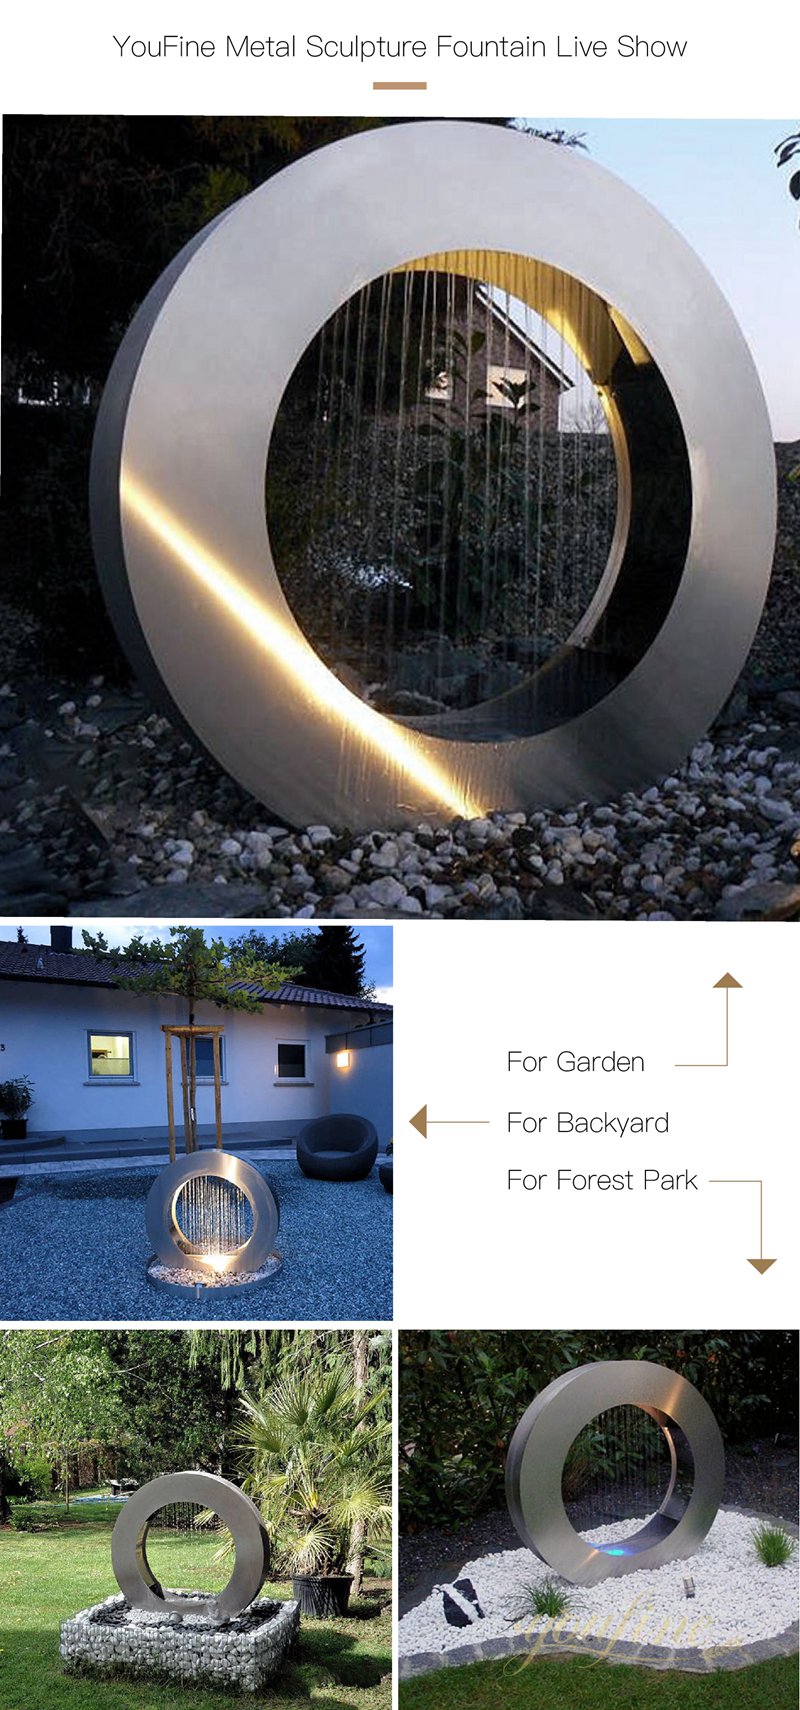 YouFine Modern Stainless Steel Water Feature Sculpture 